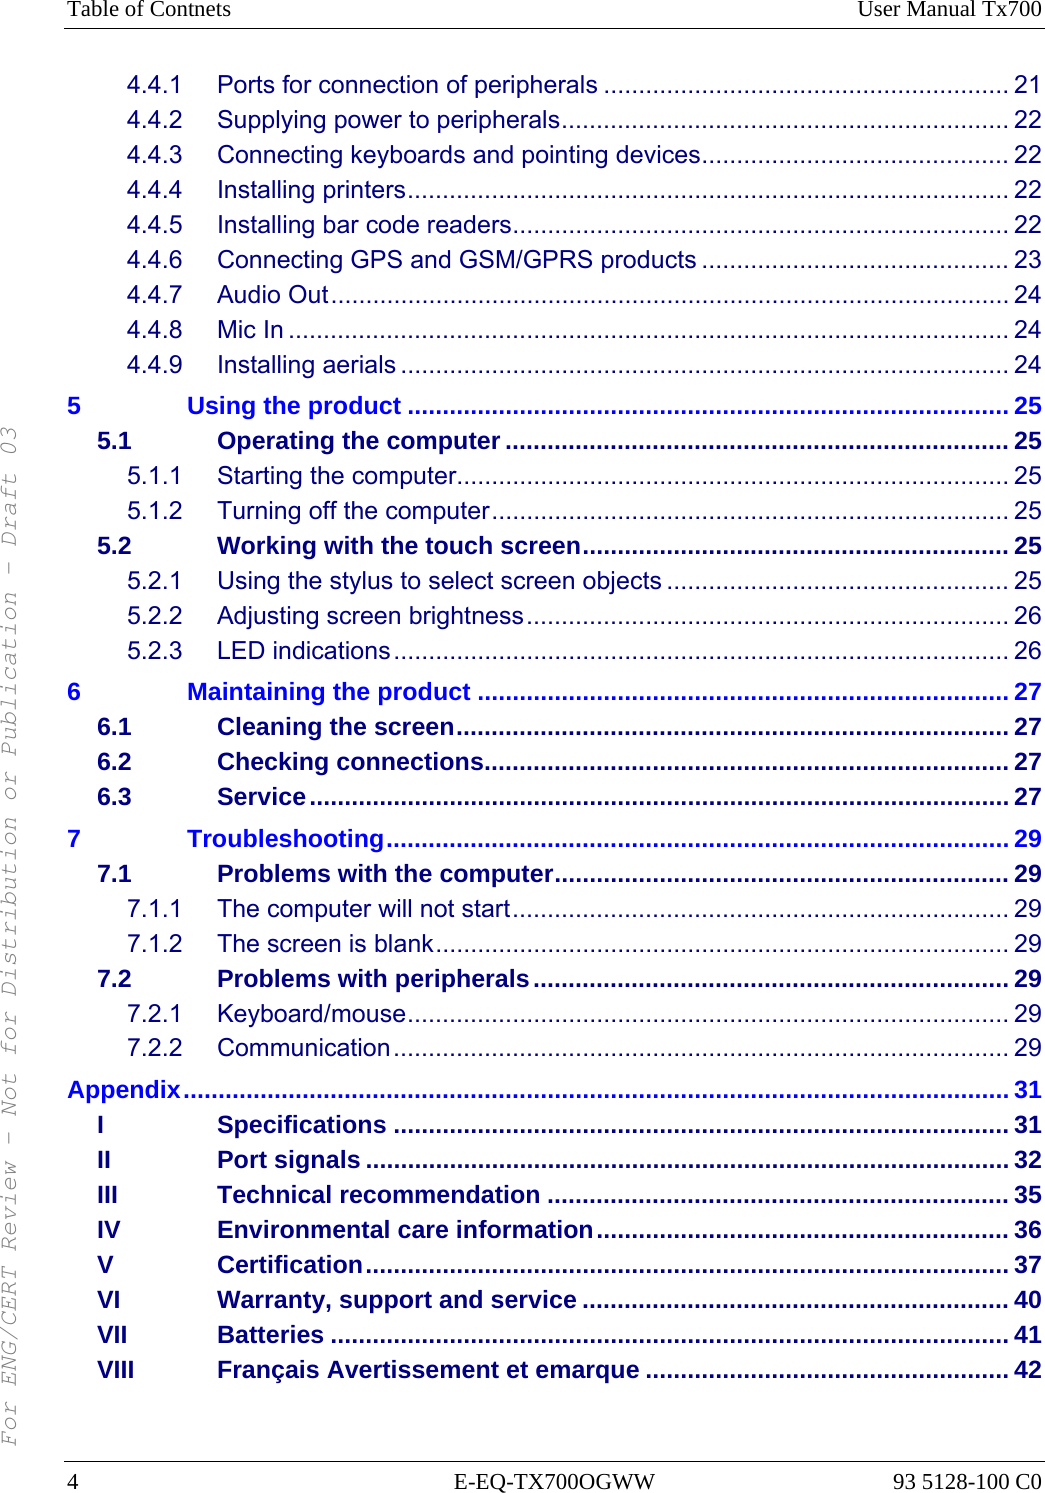 Table of Contnets  User Manual Tx700 4 E-EQ-TX700OGWW 93 5128-100 C0 4.4.1 Ports for connection of peripherals .......................................................... 21 4.4.2 Supplying power to peripherals................................................................ 22 4.4.3 Connecting keyboards and pointing devices............................................ 22 4.4.4 Installing printers...................................................................................... 22 4.4.5 Installing bar code readers....................................................................... 22 4.4.6 Connecting GPS and GSM/GPRS products ............................................ 23 4.4.7 Audio Out................................................................................................. 24 4.4.8 Mic In ....................................................................................................... 24 4.4.9 Installing aerials ....................................................................................... 24 5 Using the product ...................................................................................... 25 5.1 Operating the computer ........................................................................ 25 5.1.1 Starting the computer............................................................................... 25 5.1.2 Turning off the computer.......................................................................... 25 5.2 Working with the touch screen............................................................. 25 5.2.1 Using the stylus to select screen objects ................................................. 25 5.2.2 Adjusting screen brightness..................................................................... 26 5.2.3 LED indications........................................................................................ 26 6 Maintaining the product ............................................................................ 27 6.1 Cleaning the screen............................................................................... 27 6.2 Checking connections........................................................................... 27 6.3 Service.................................................................................................... 27 7 Troubleshooting......................................................................................... 29 7.1 Problems with the computer................................................................. 29 7.1.1 The computer will not start....................................................................... 29 7.1.2 The screen is blank.................................................................................. 29 7.2 Problems with peripherals.................................................................... 29 7.2.1 Keyboard/mouse...................................................................................... 29 7.2.2 Communication........................................................................................ 29 Appendix...................................................................................................................... 31 I Specifications ........................................................................................ 31 II Port signals ............................................................................................ 32 III Technical recommendation .................................................................. 35 IV Environmental care information........................................................... 36 V Certification............................................................................................ 37 VI Warranty, support and service ............................................................. 40 VII Batteries ................................................................................................. 41 VIII Français Avertissement et emarque .................................................... 42 For ENG/CERT Review - Not for Distribution or Publication - Draft 03